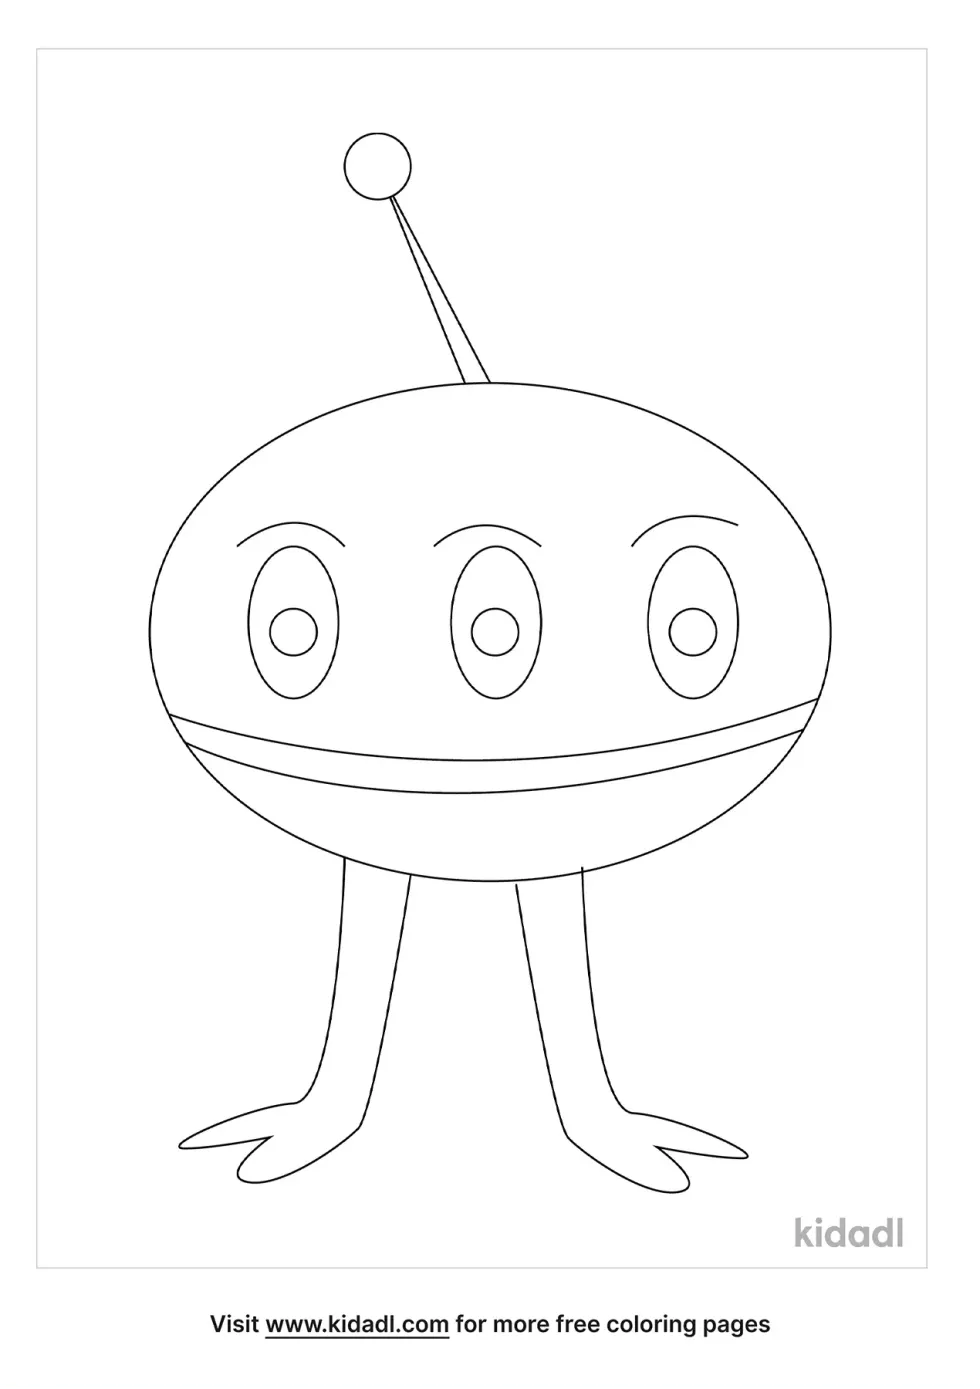 Alien With 3 Eyes And 1 Antennae